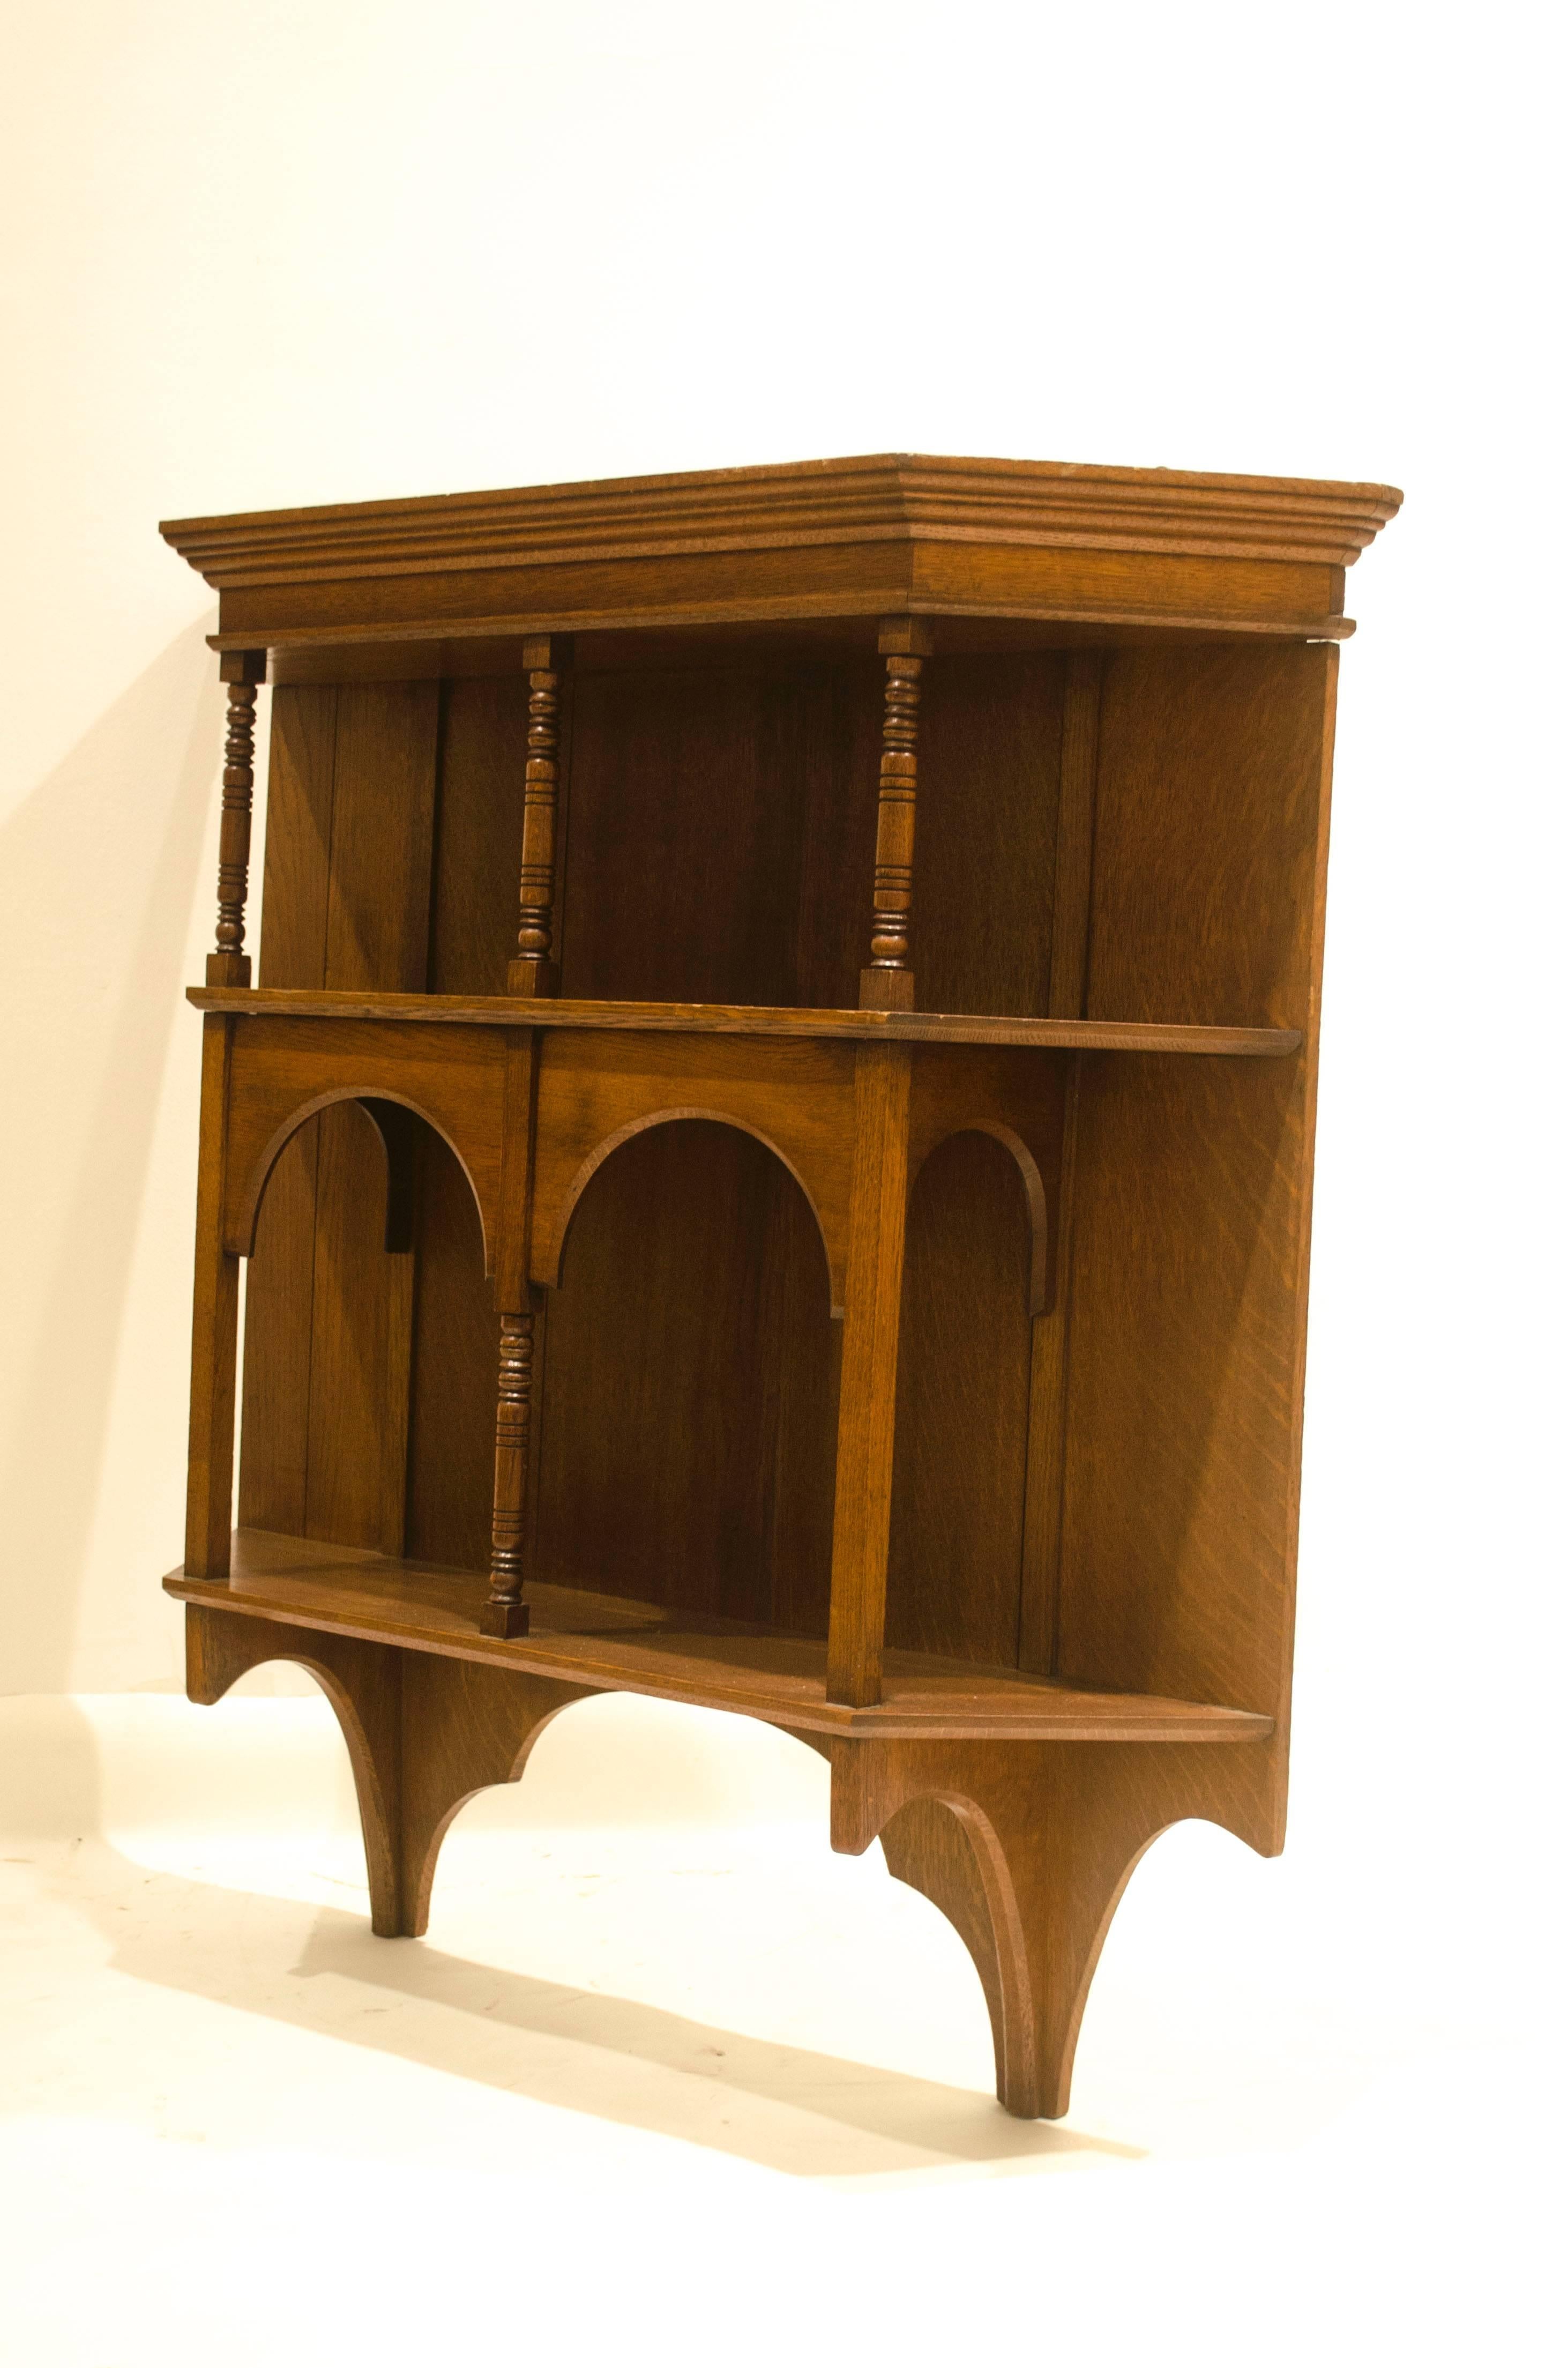 Edward William Godwin (attributed) for Collinson and Lock, a Fine set of hanging oak wall shelves, with turned supports. 
See Soros, Susan Weber 'The Secular Furniture of E.W. Godwin', This wall shelf has almost the identical turnings to a drawing